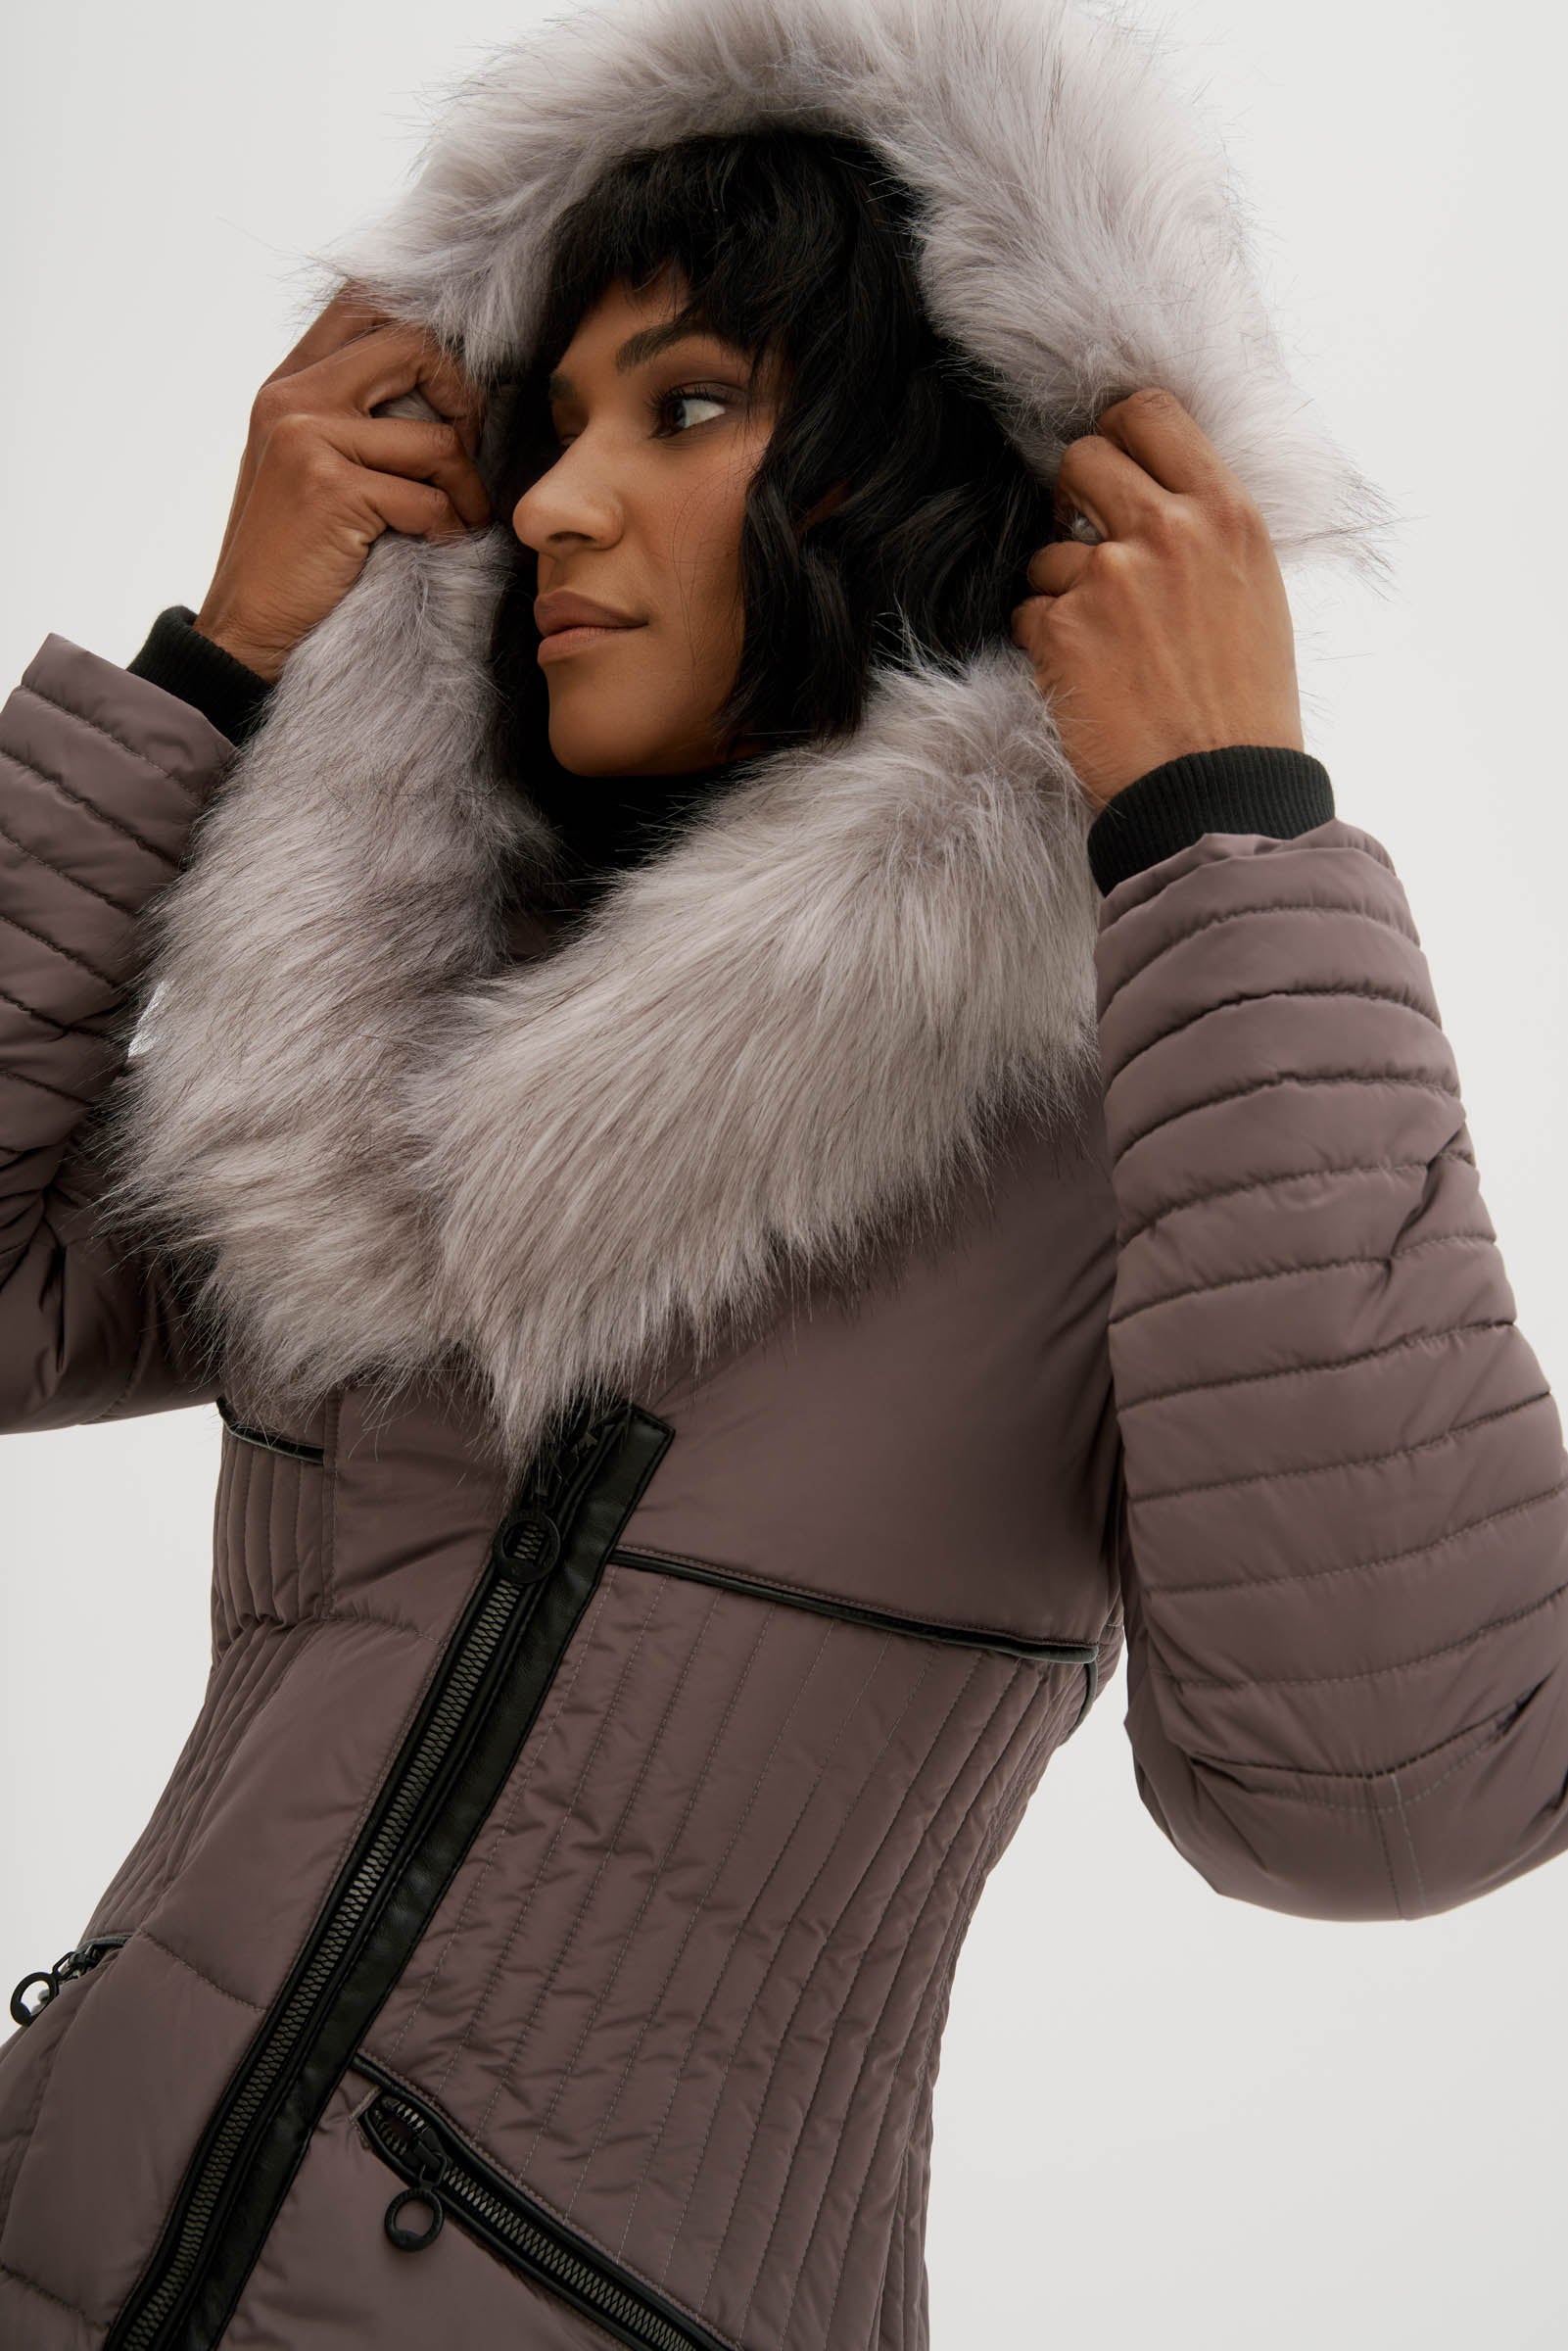 Women's Coats with Fur Hood, Explore our New Arrivals